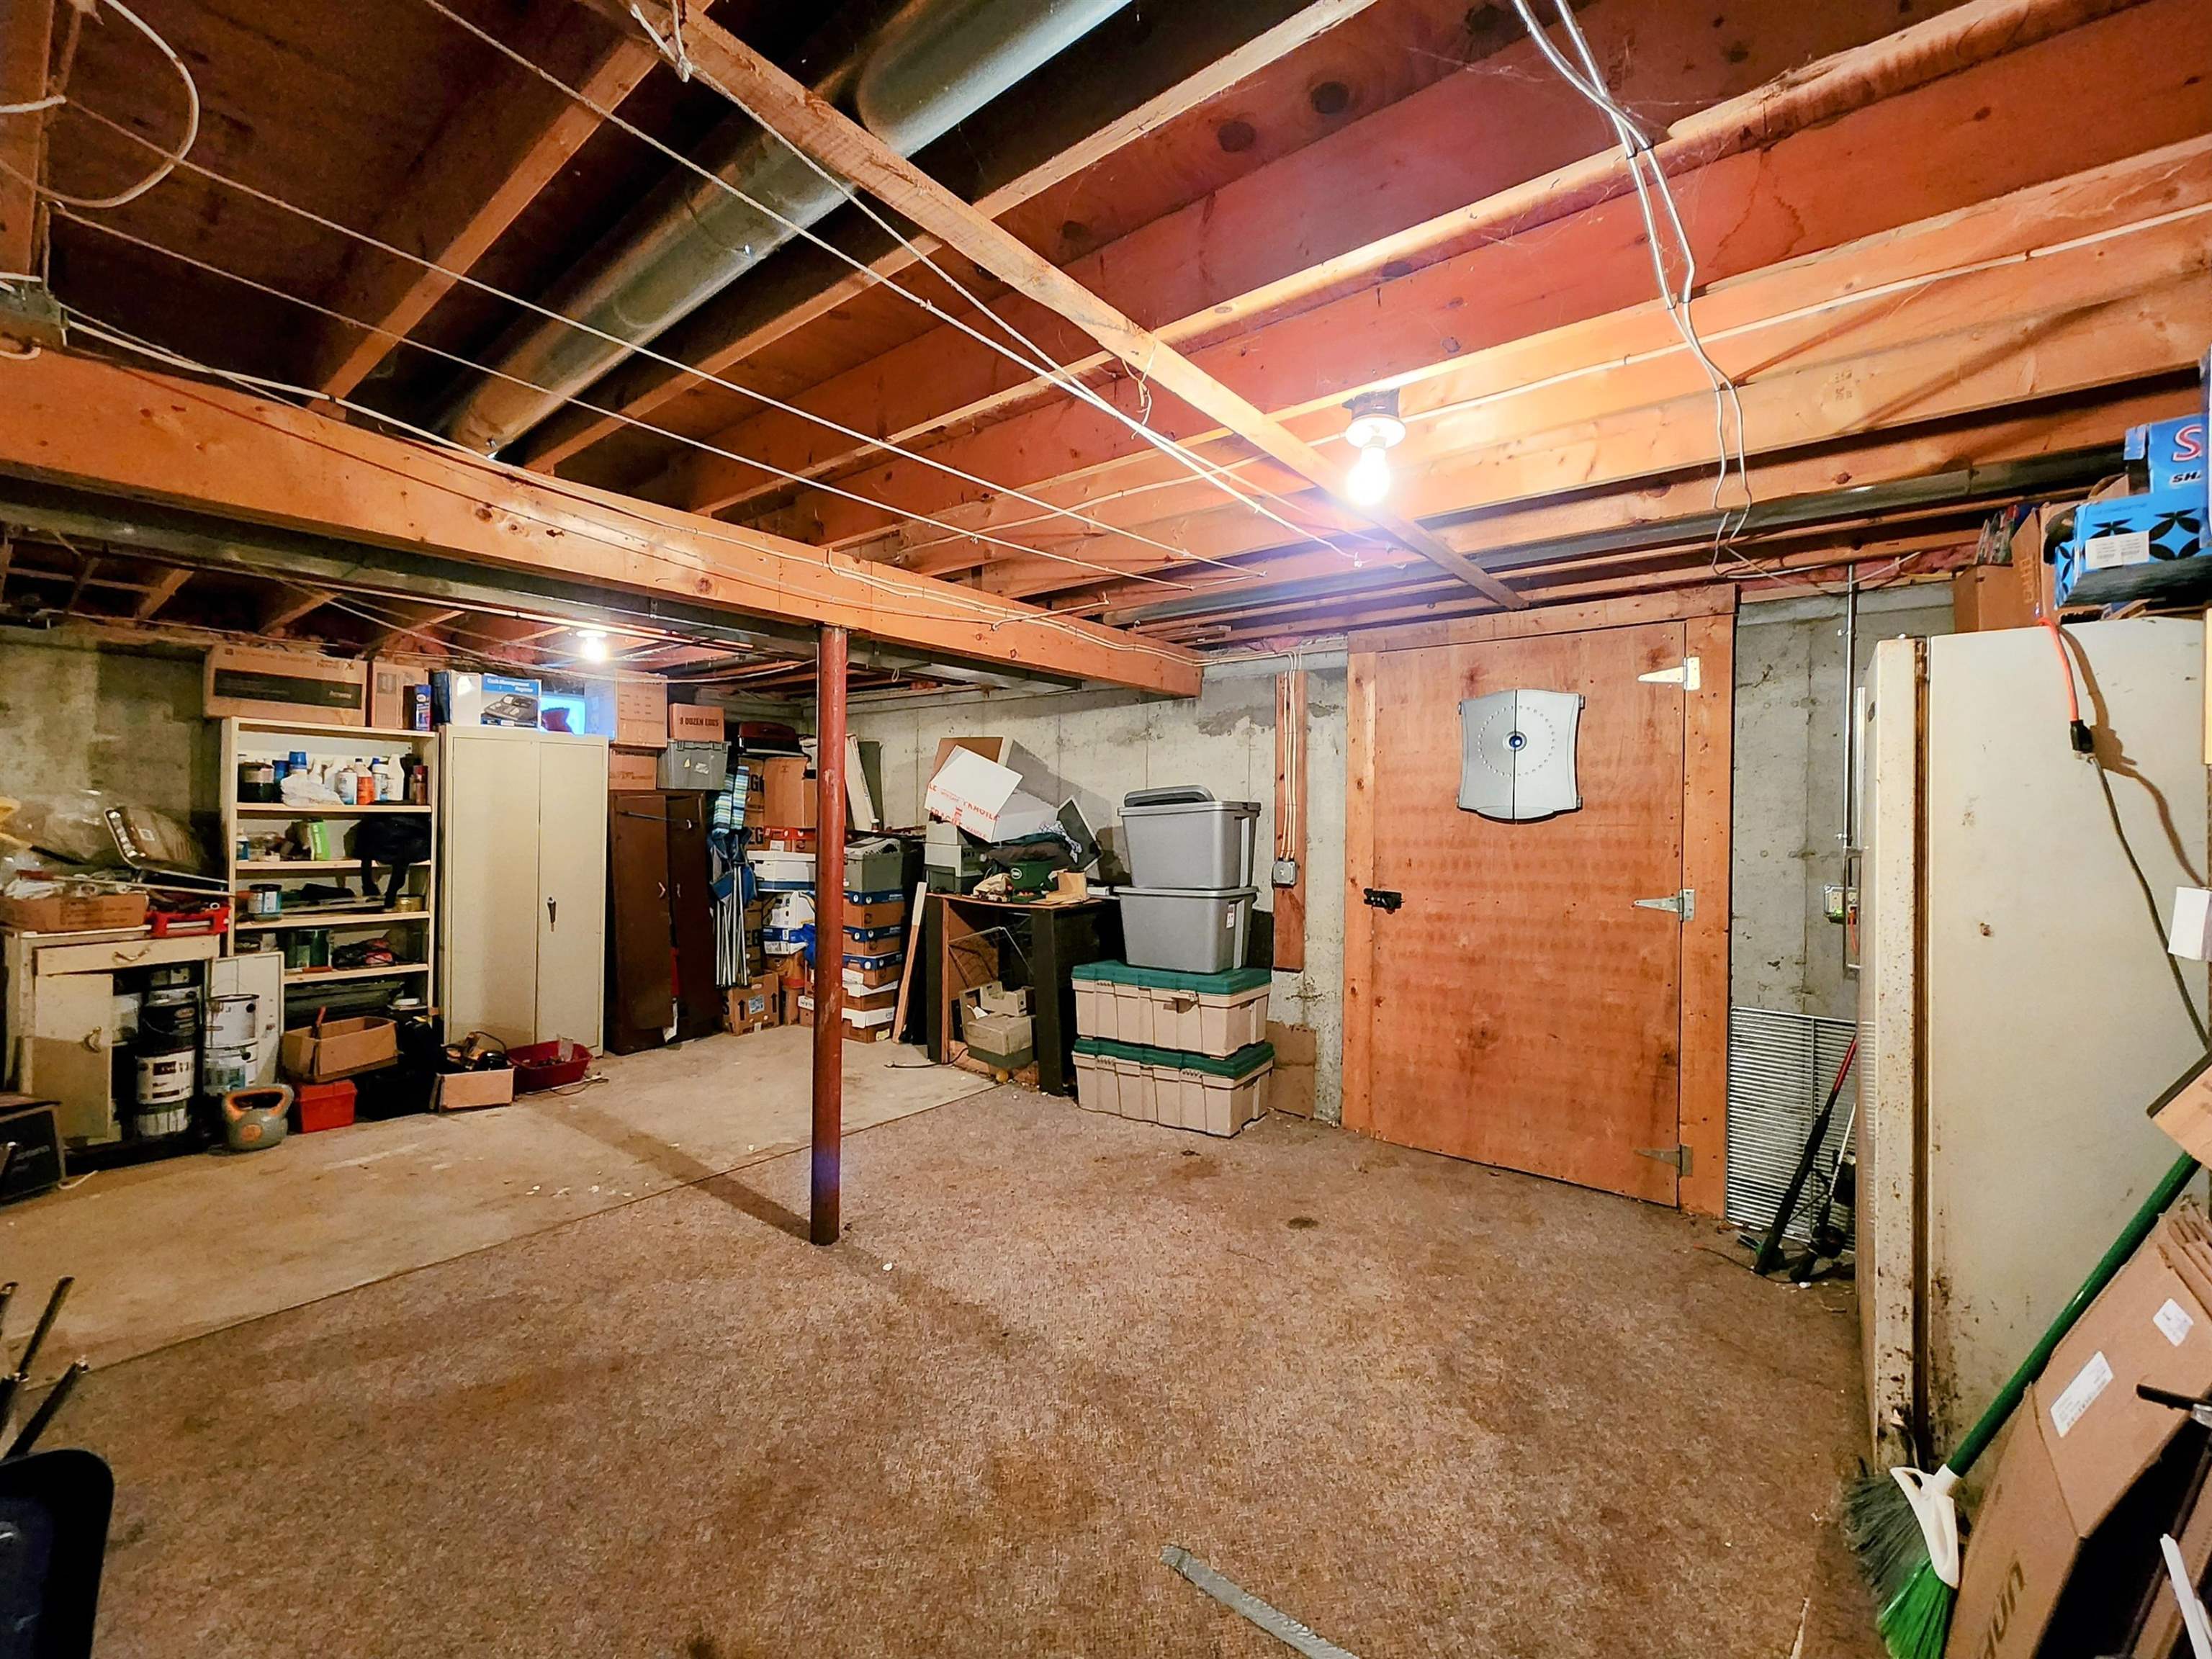 2nd view of the unfinished space in basement